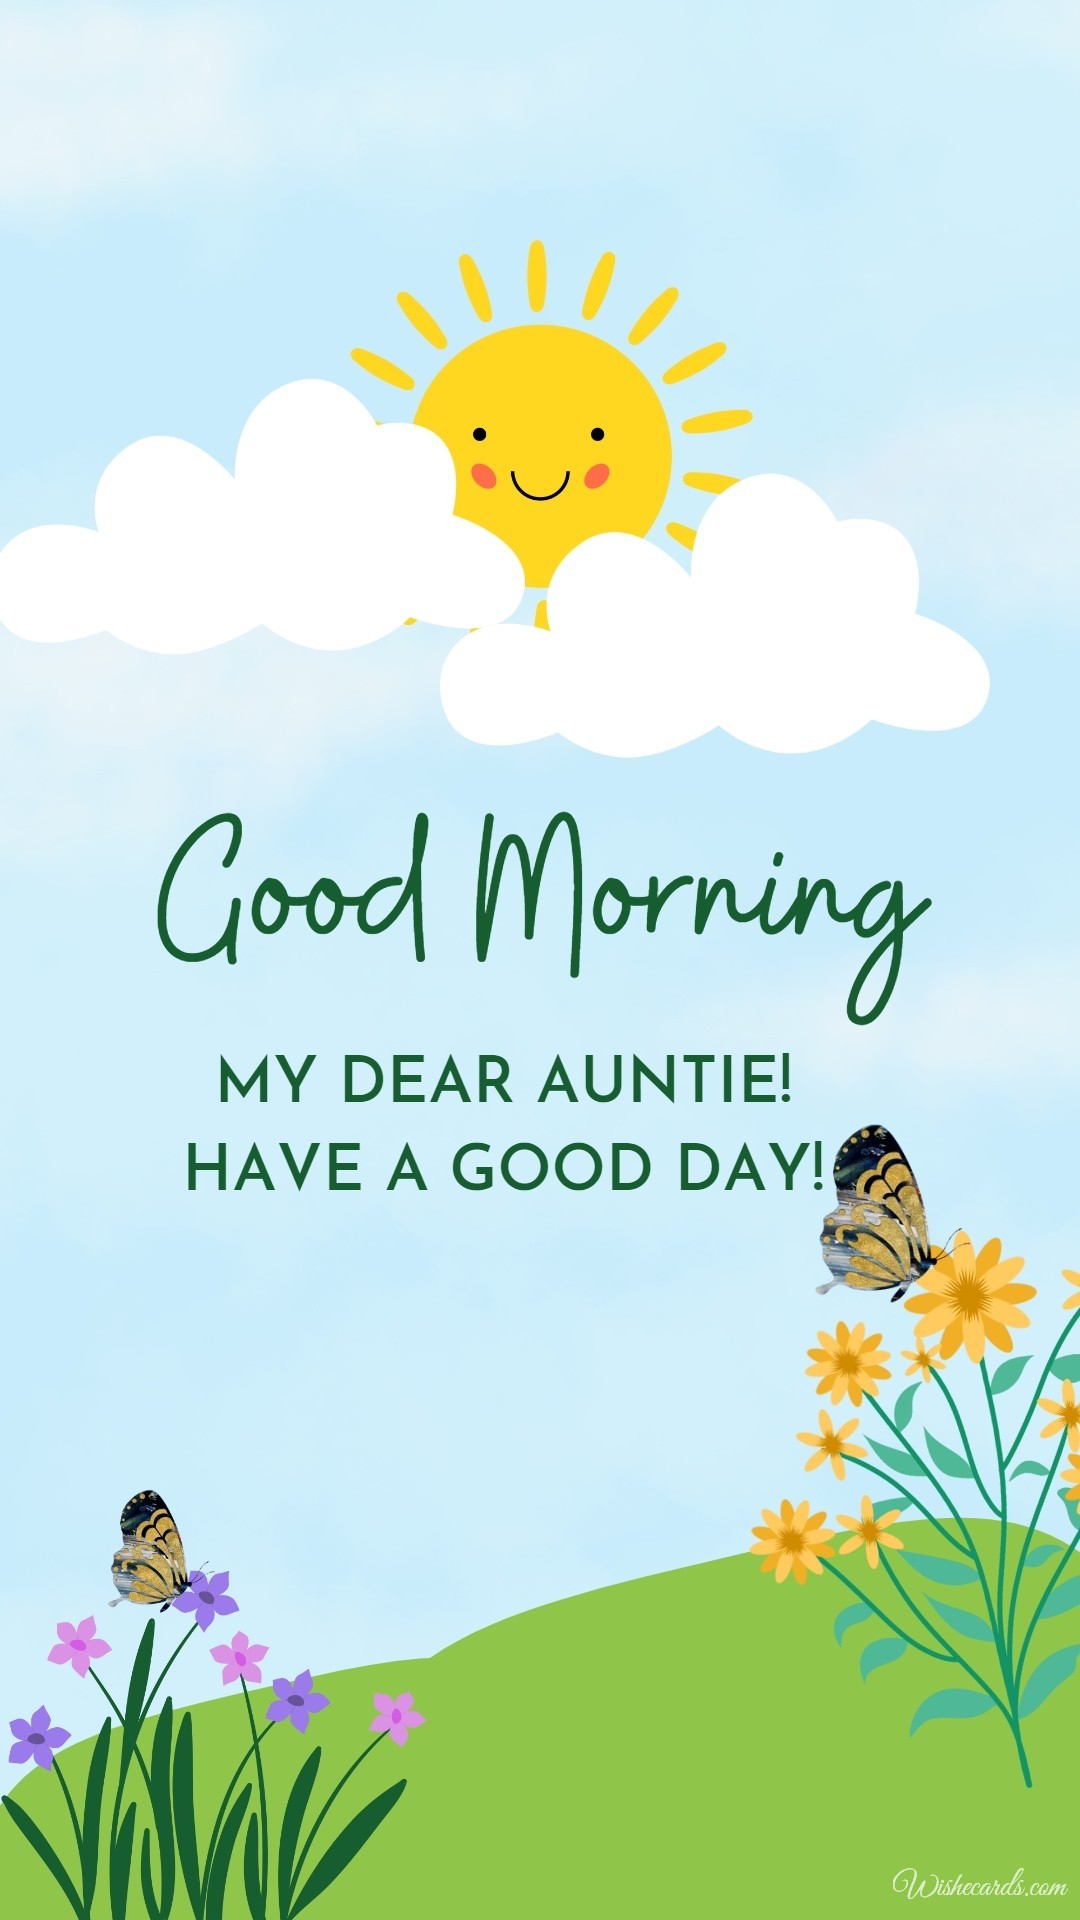 Good Morning to Aunt Image